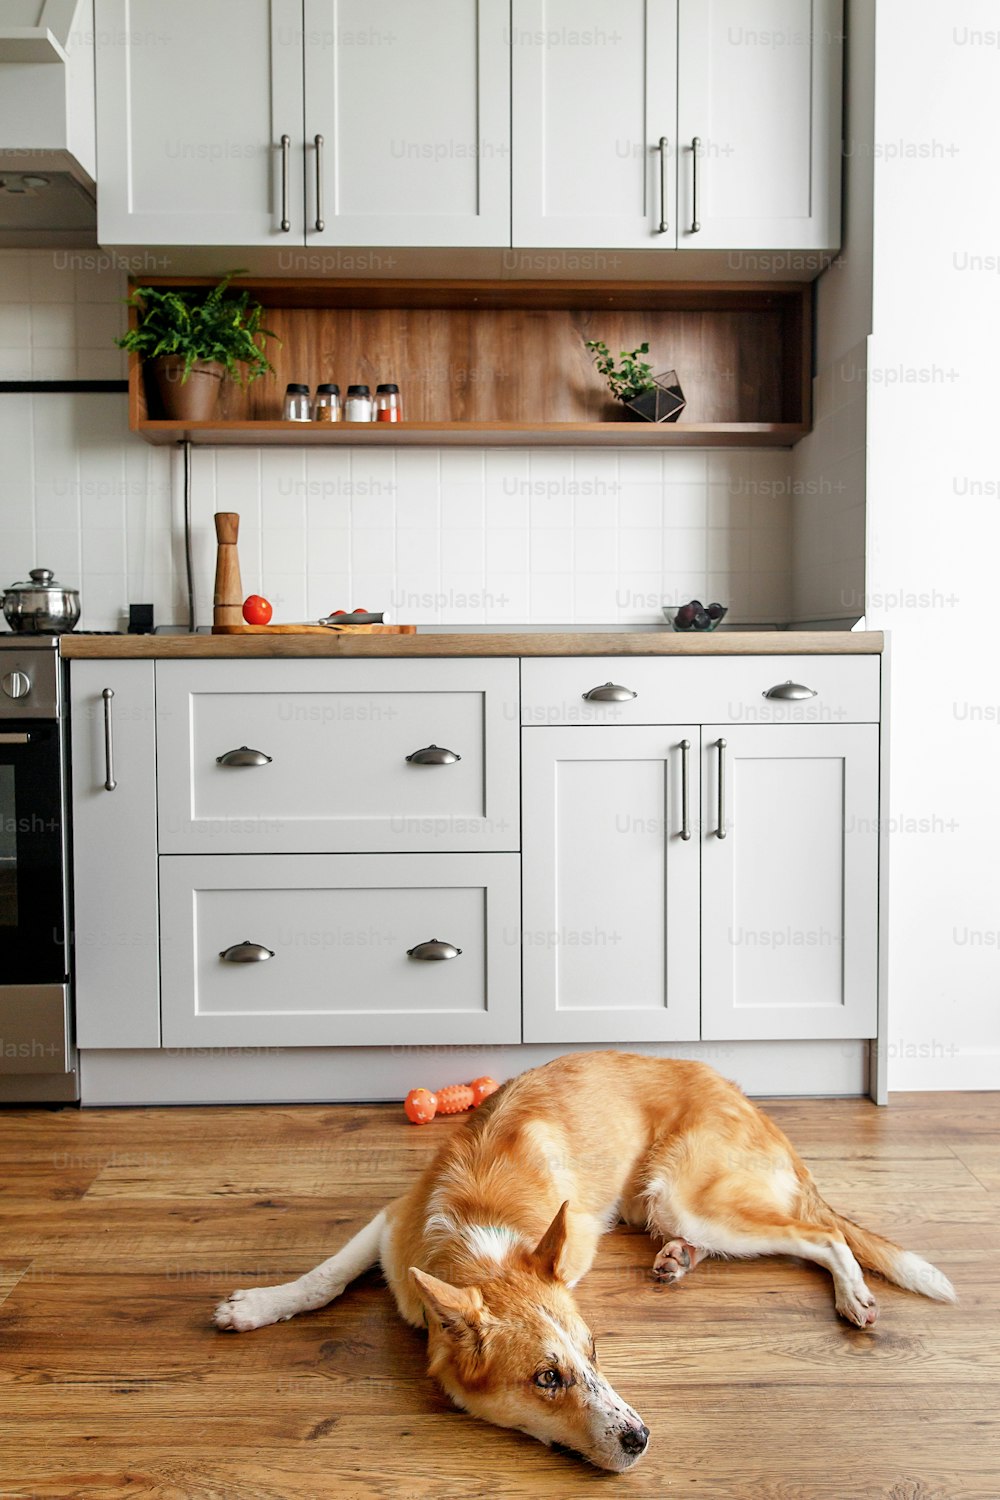 cute golden dog sitting at stylish light gray kitchen interior with modern cabinets and stainless steel appliances in new home. design in scandinavian style. green plants decor